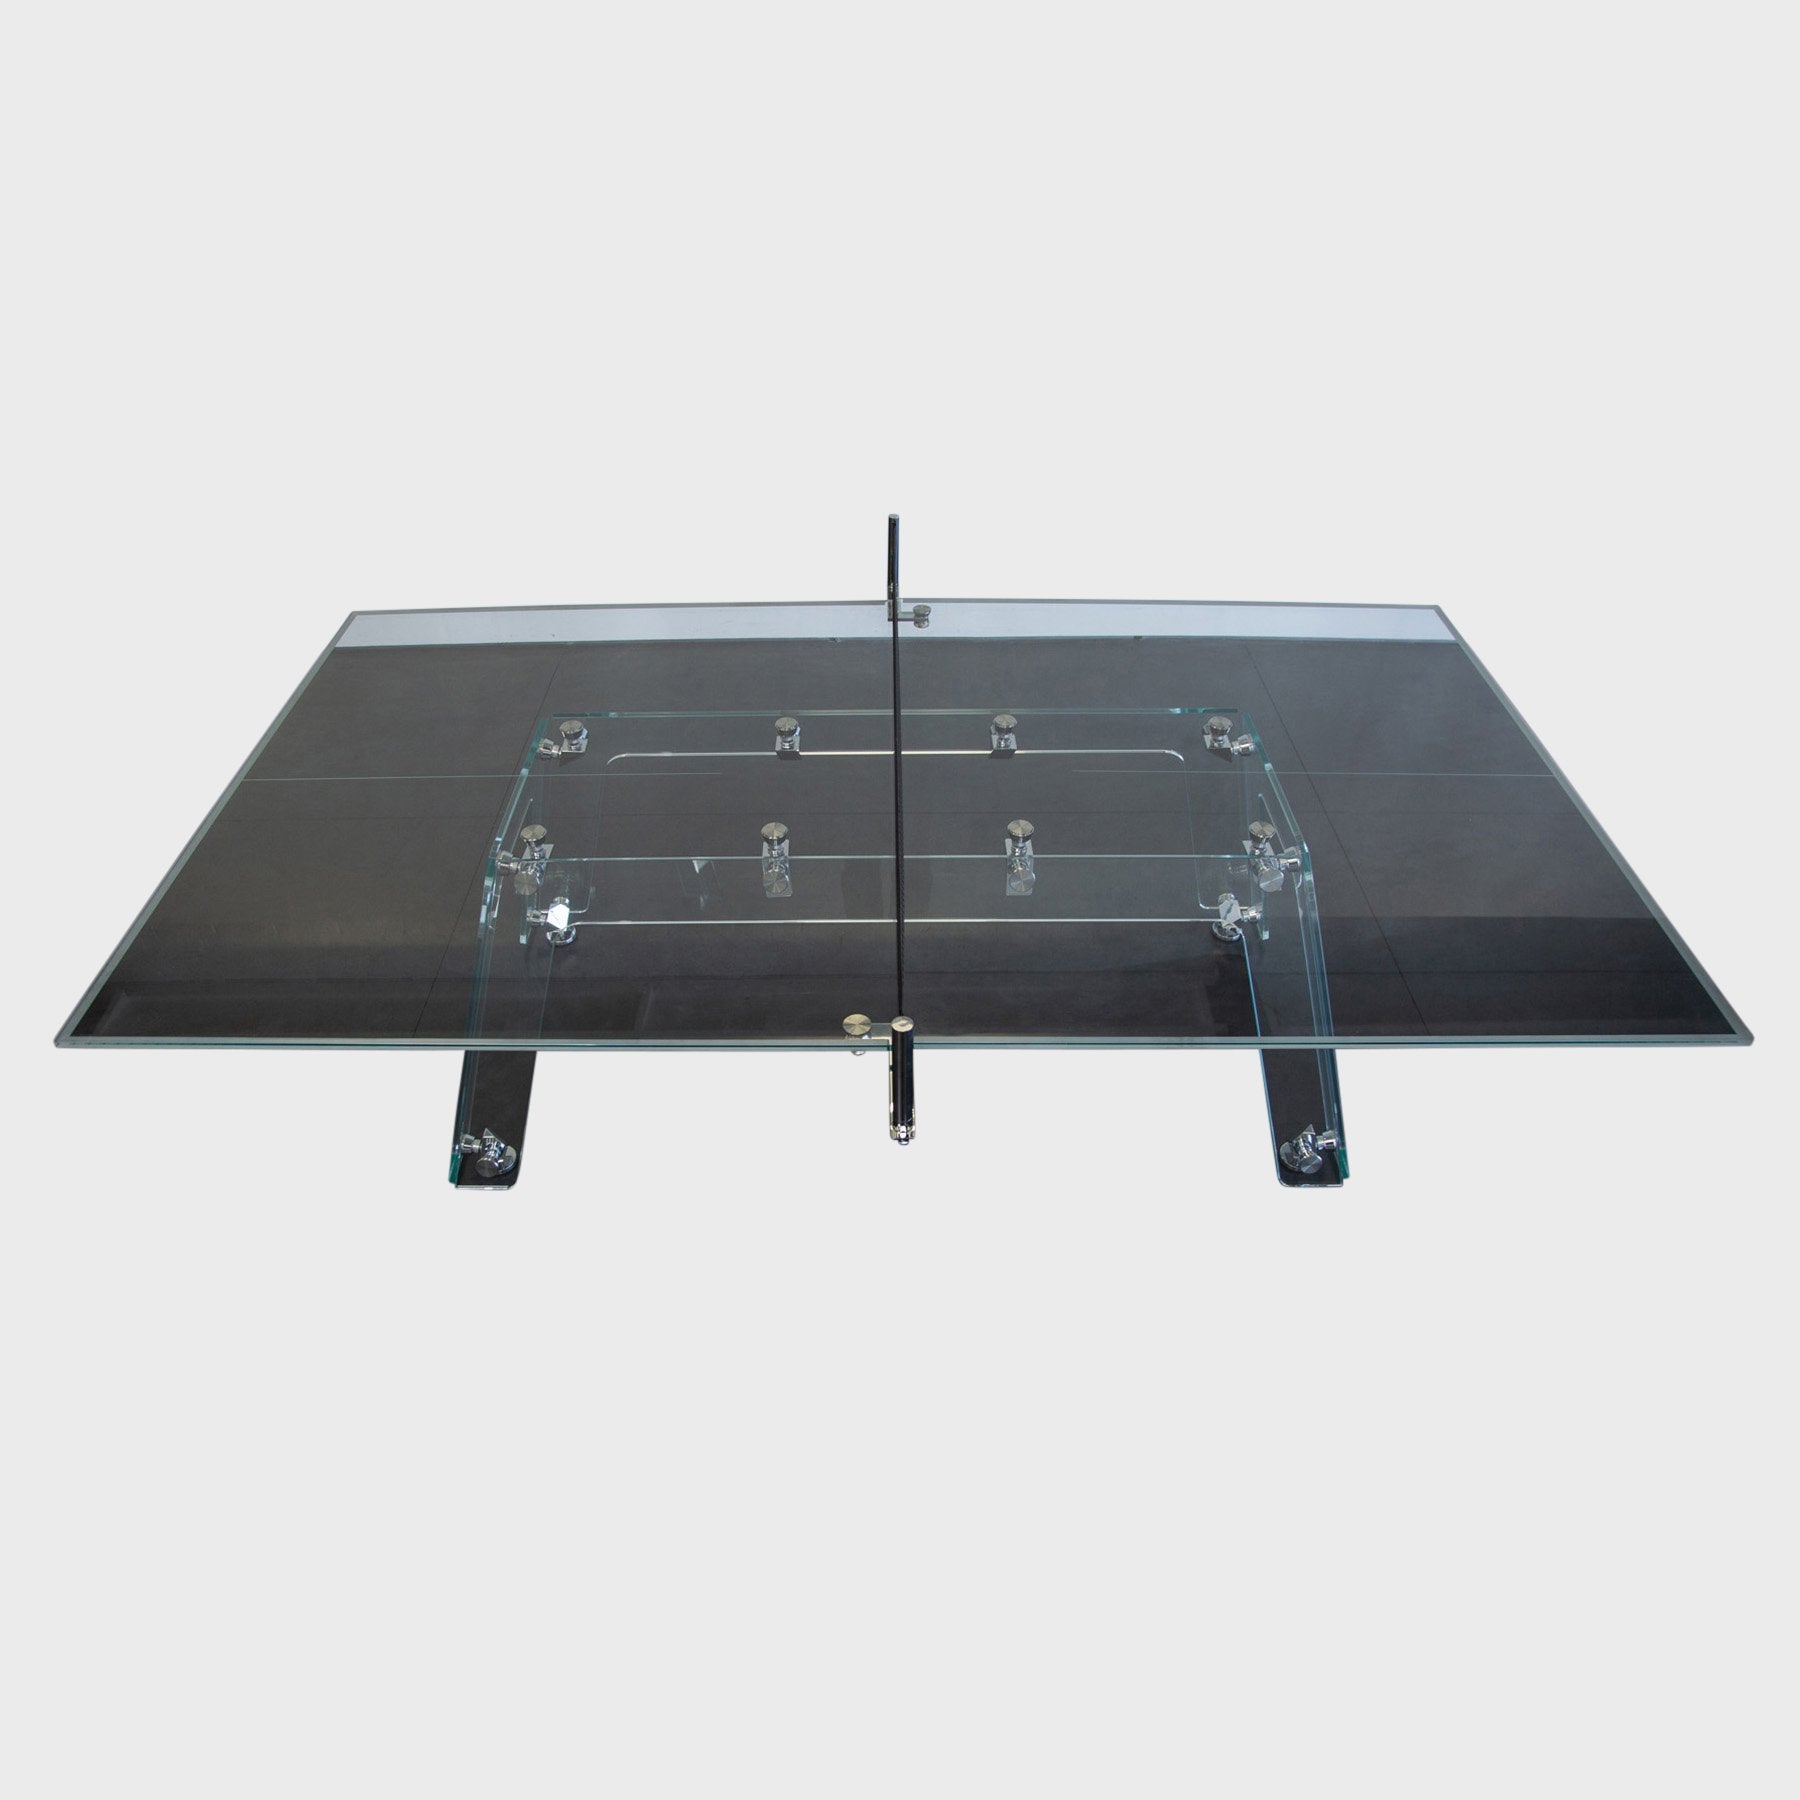 MAXFIELD PRIVATE COLLECTION | IMPATIA GLASS PING-PONG TABLE